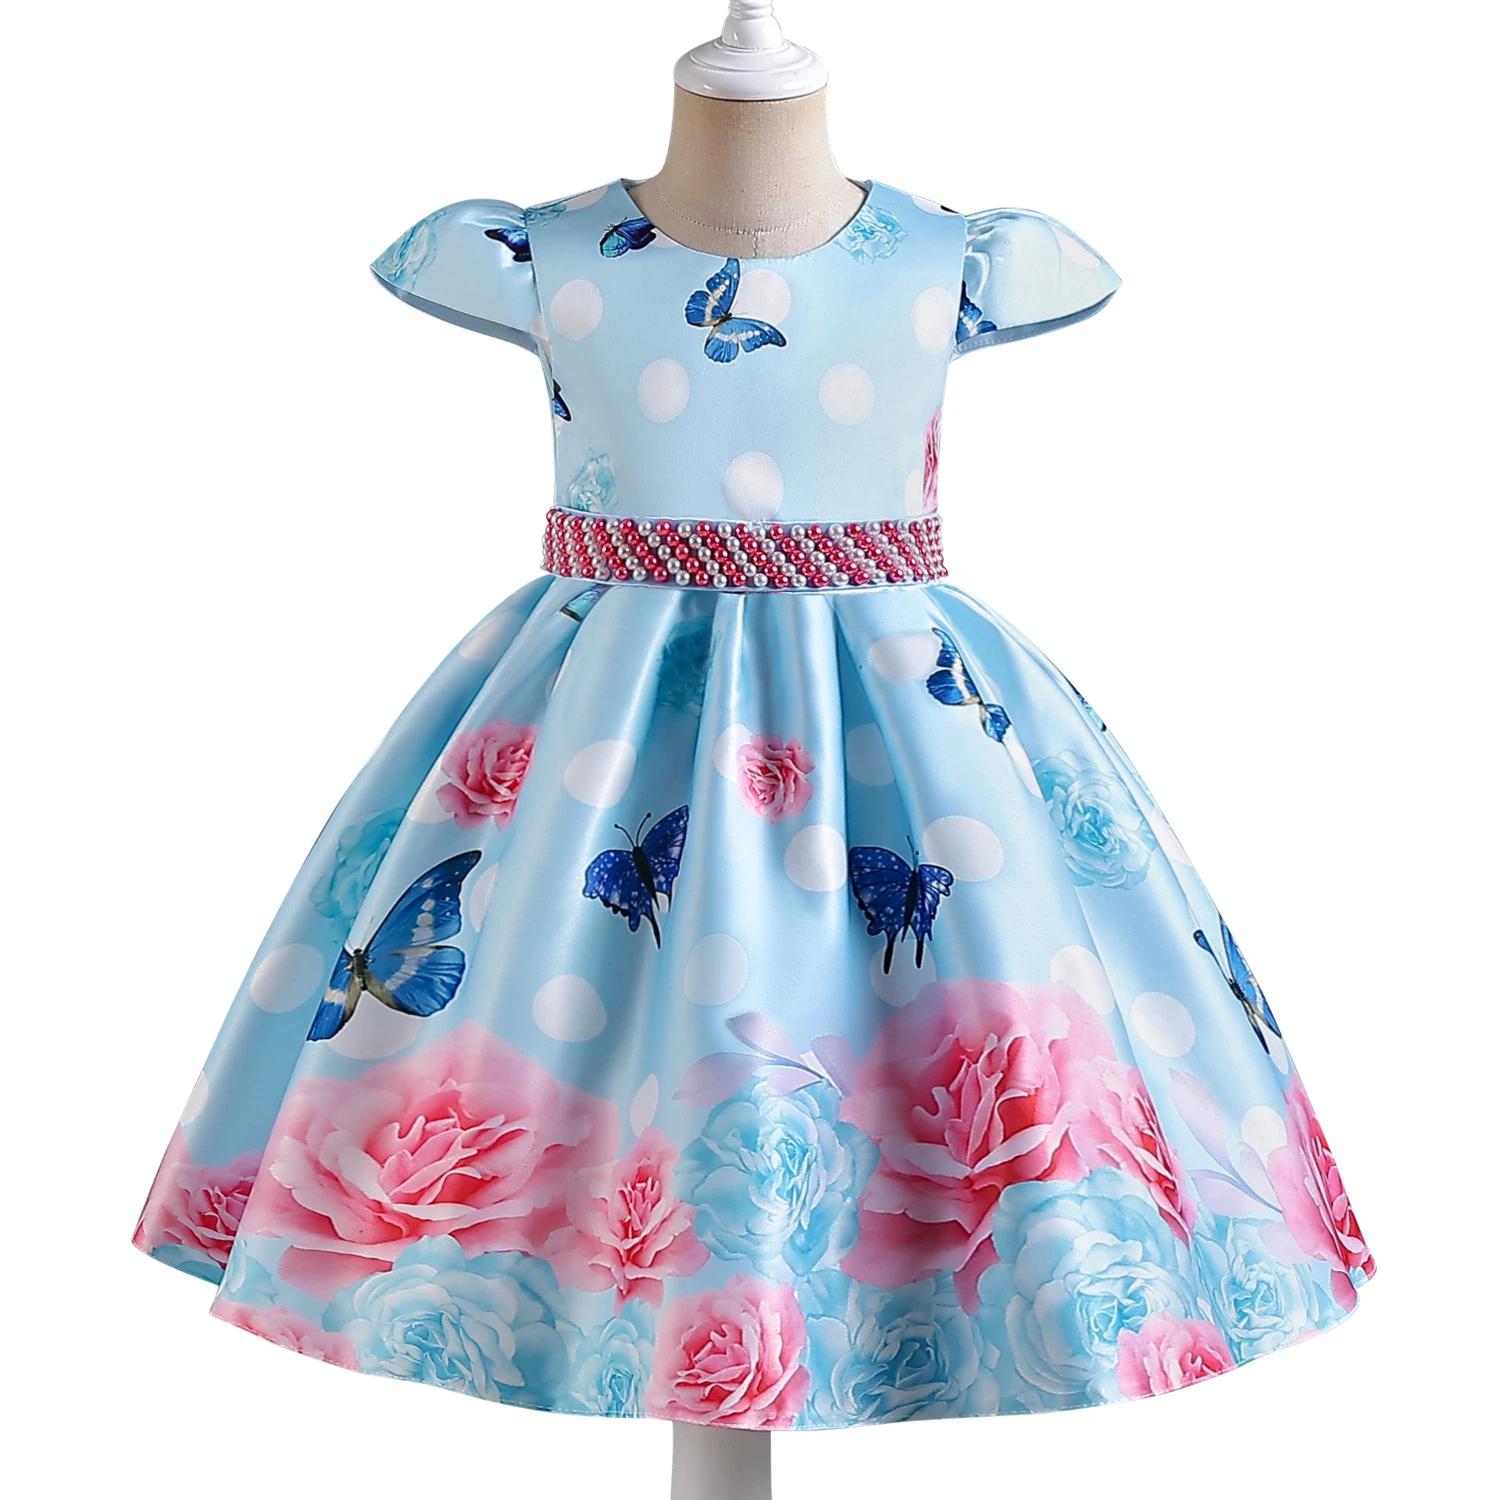 Retro Style Printed Dress Baby Performance Wear Puffy Girls Party Garment